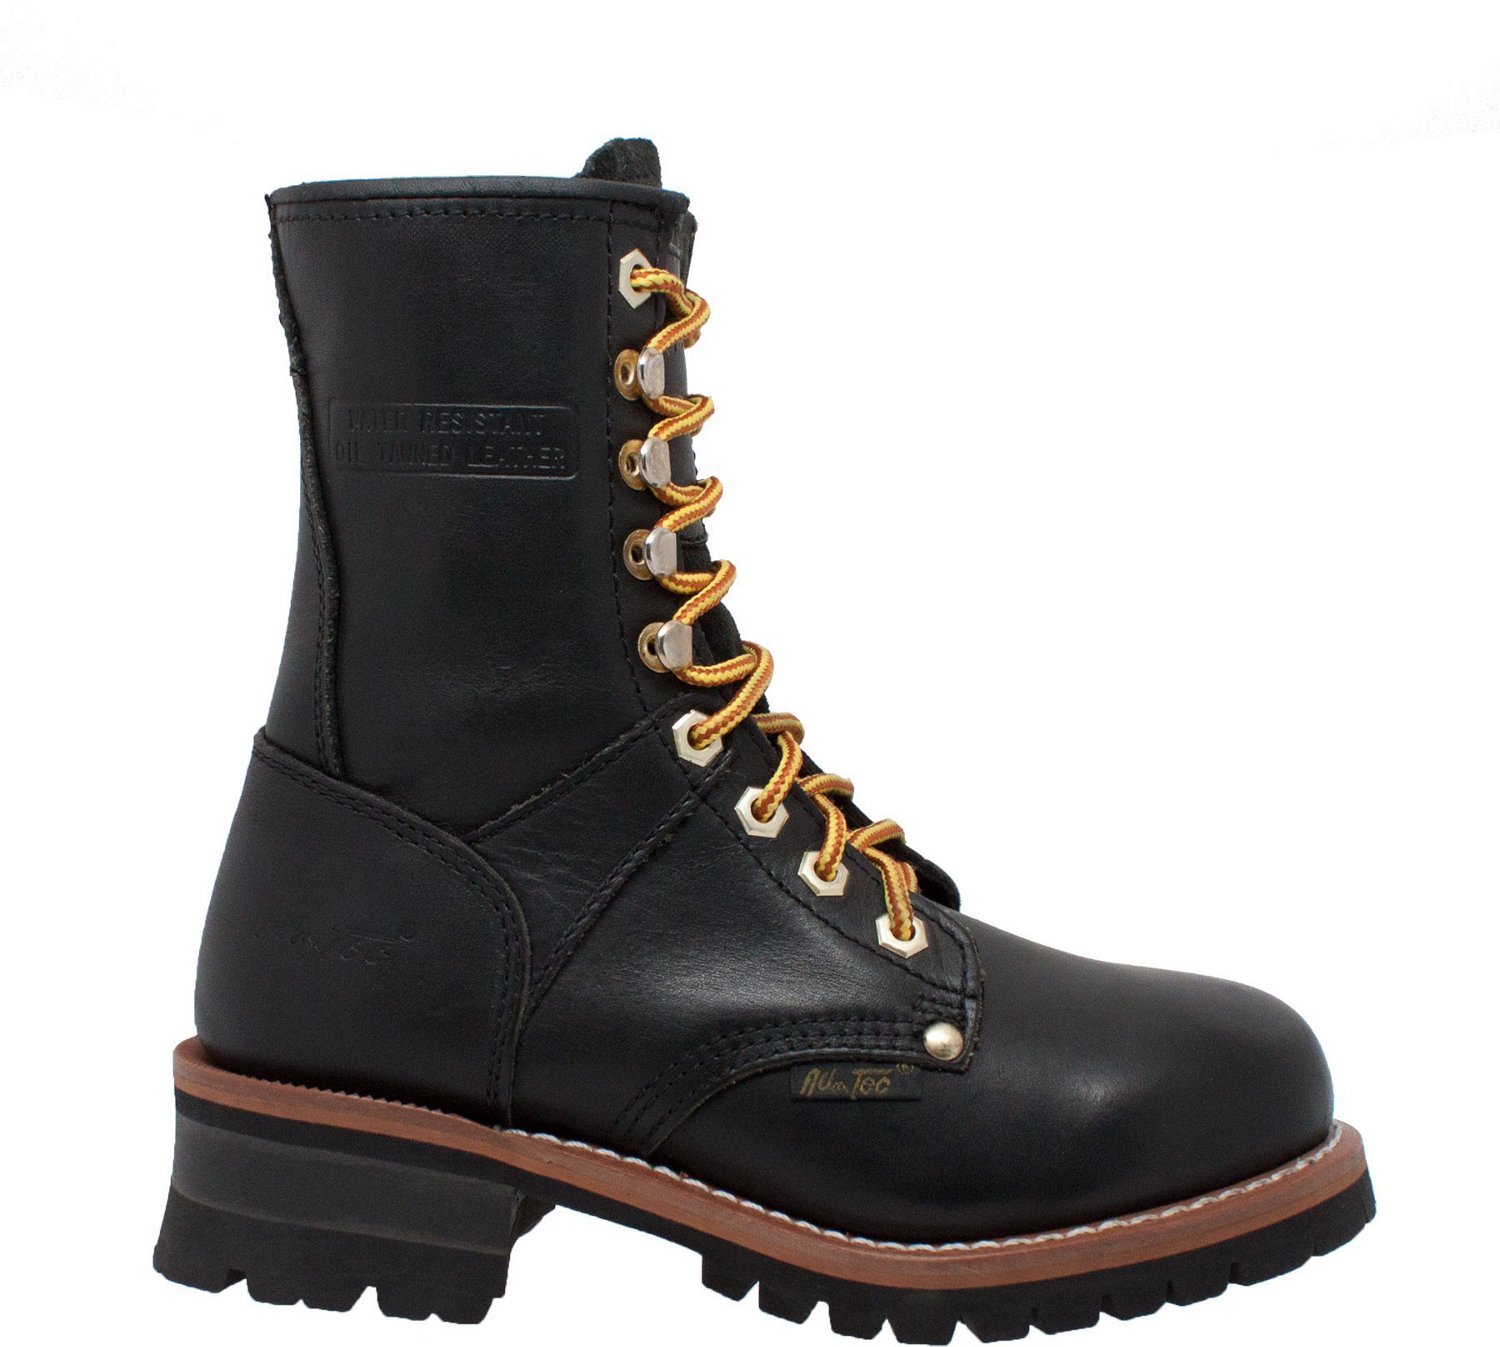 AdTec Women’s Oiled Logger Work Boots | Free Shipping at Academy